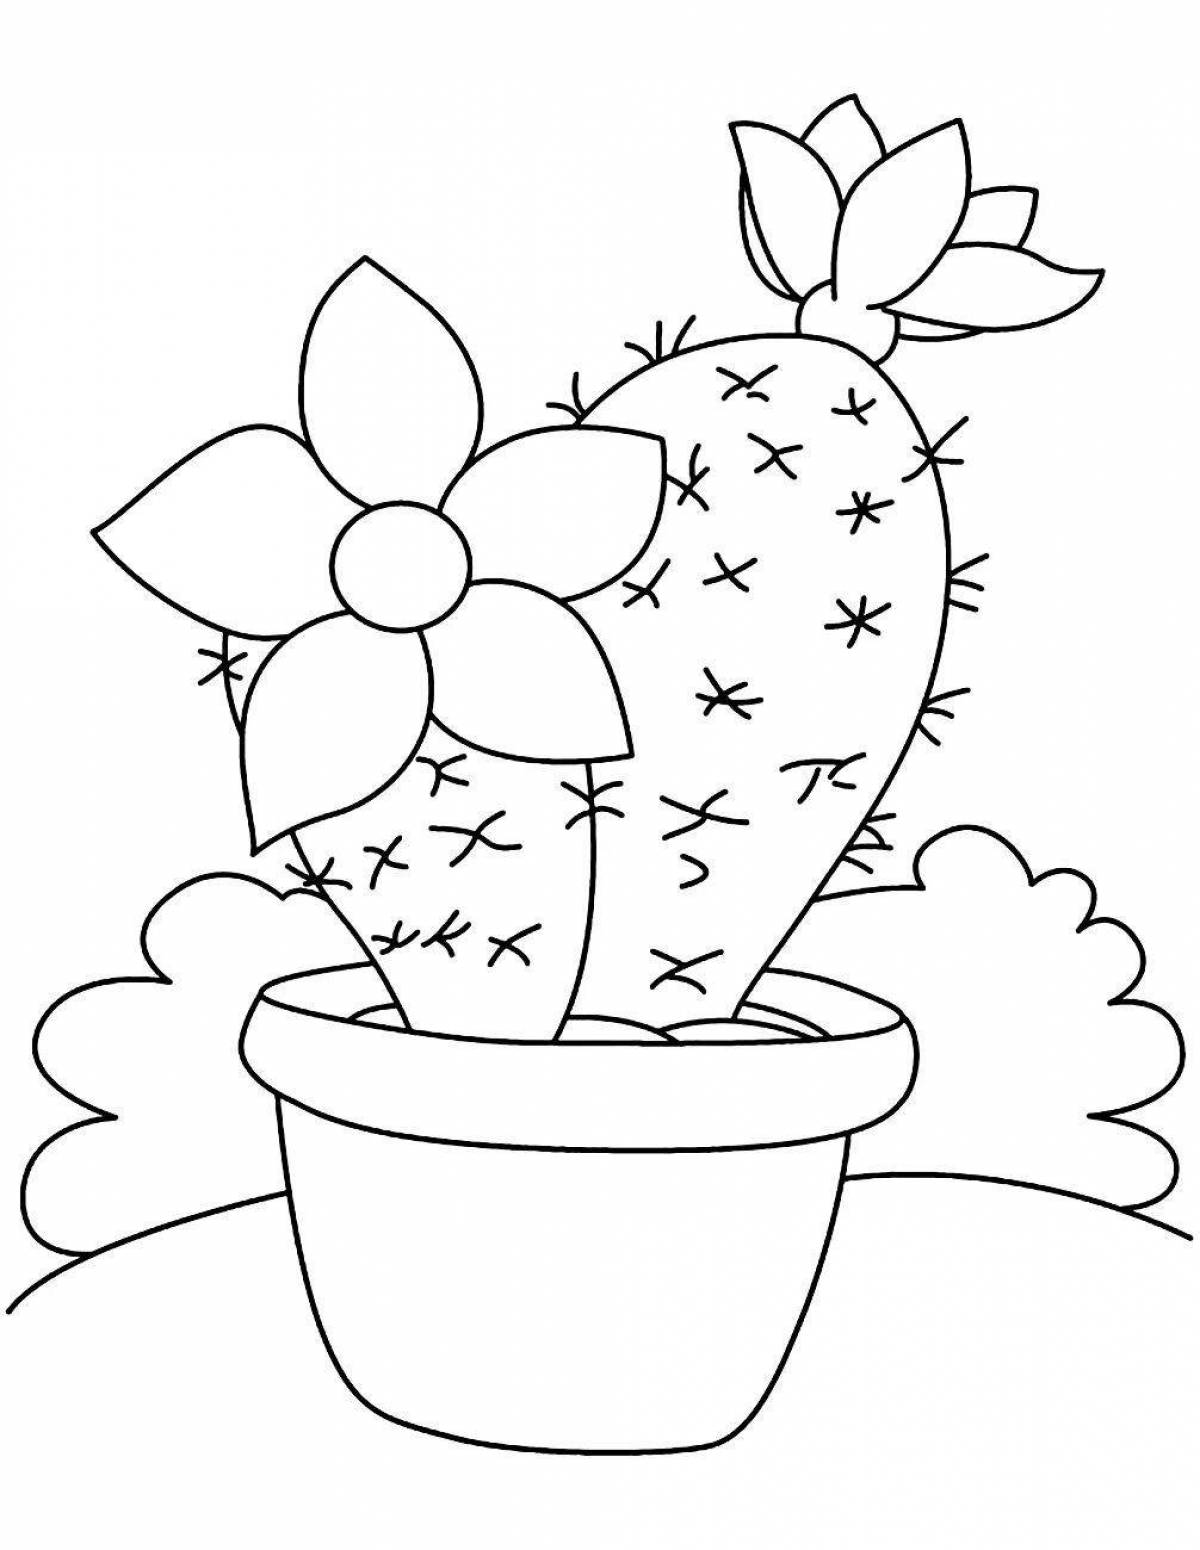 Living indoor flowers coloring for kids